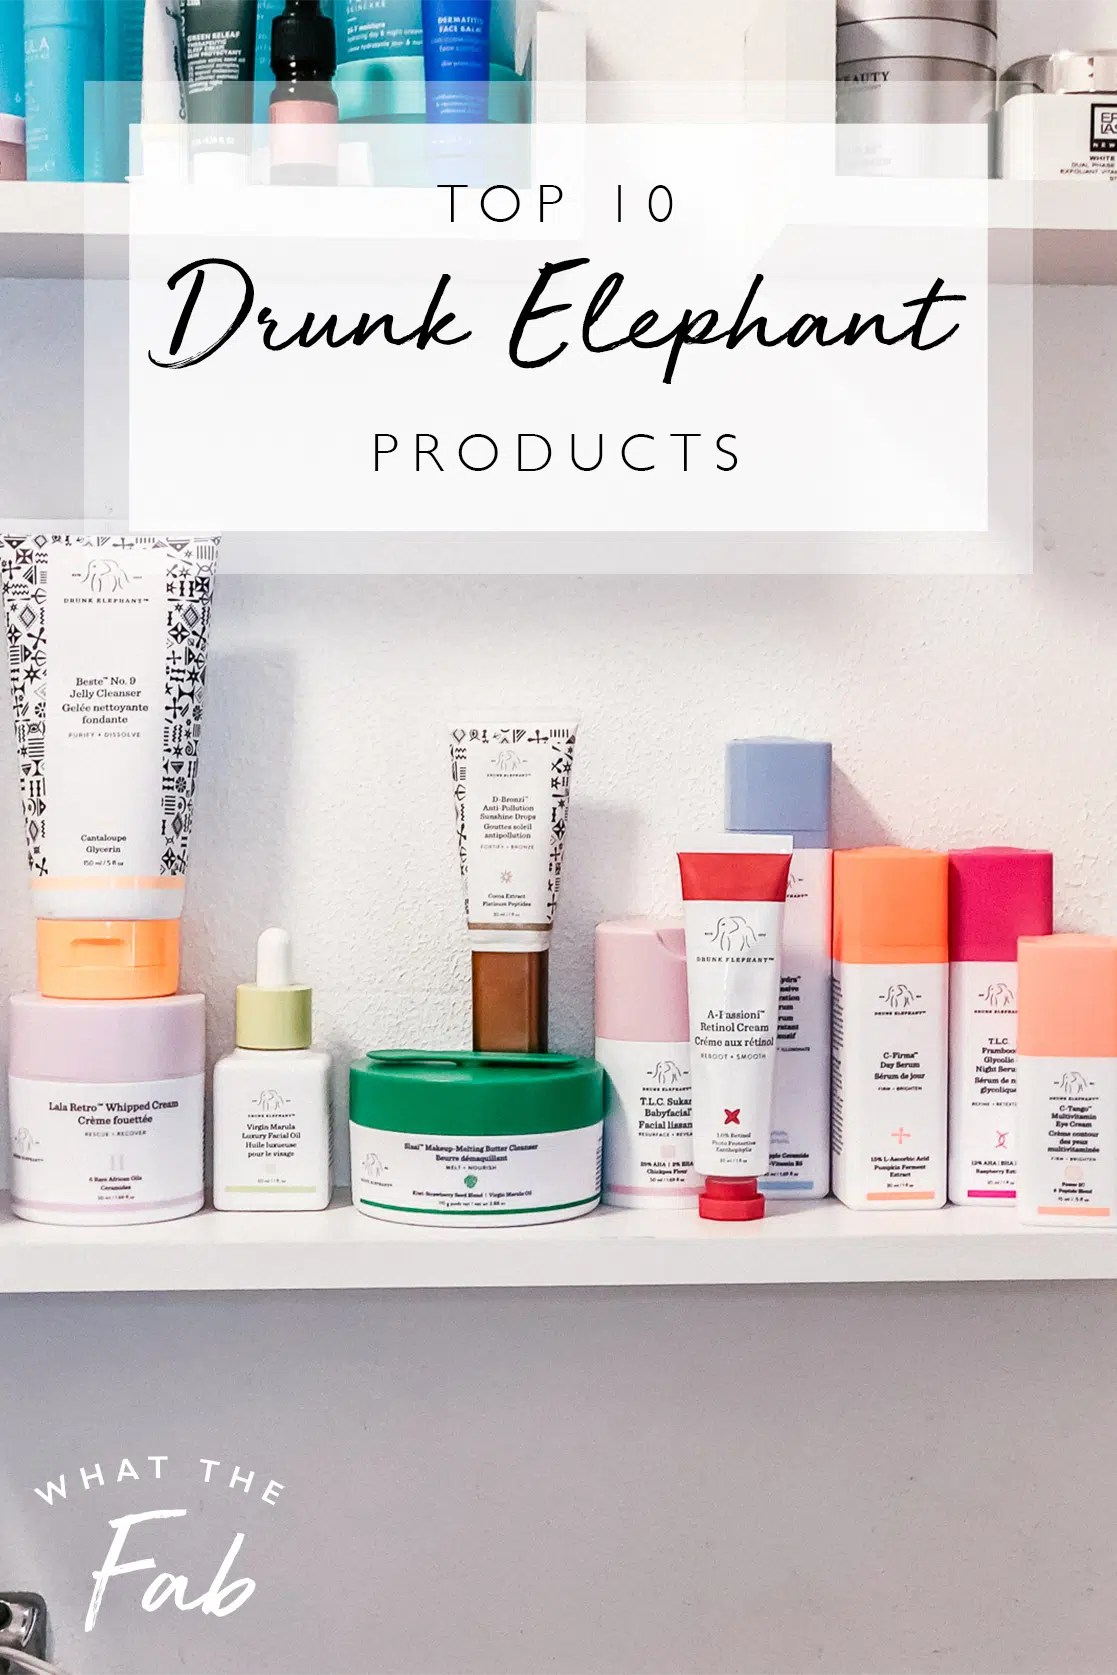 HONEST Drunk Elephant Reviews: Top 10 Drunk Elephant Products to Try